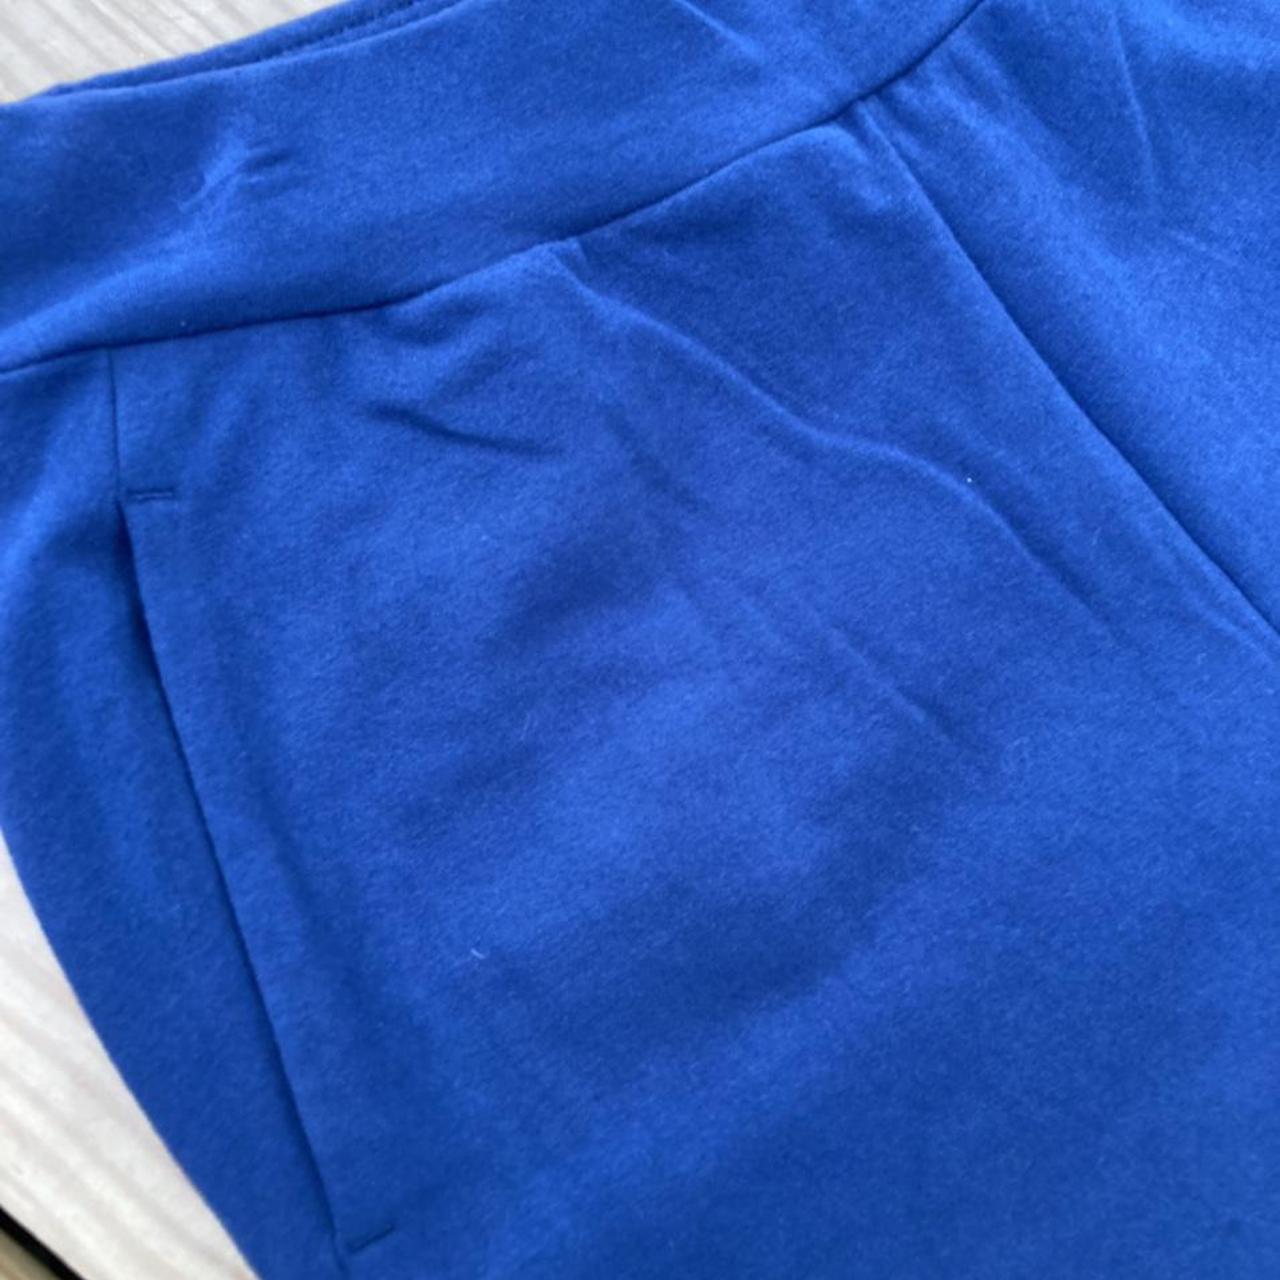 NWT Time and Tru Jogger Fleece Pants I have blue and - Depop